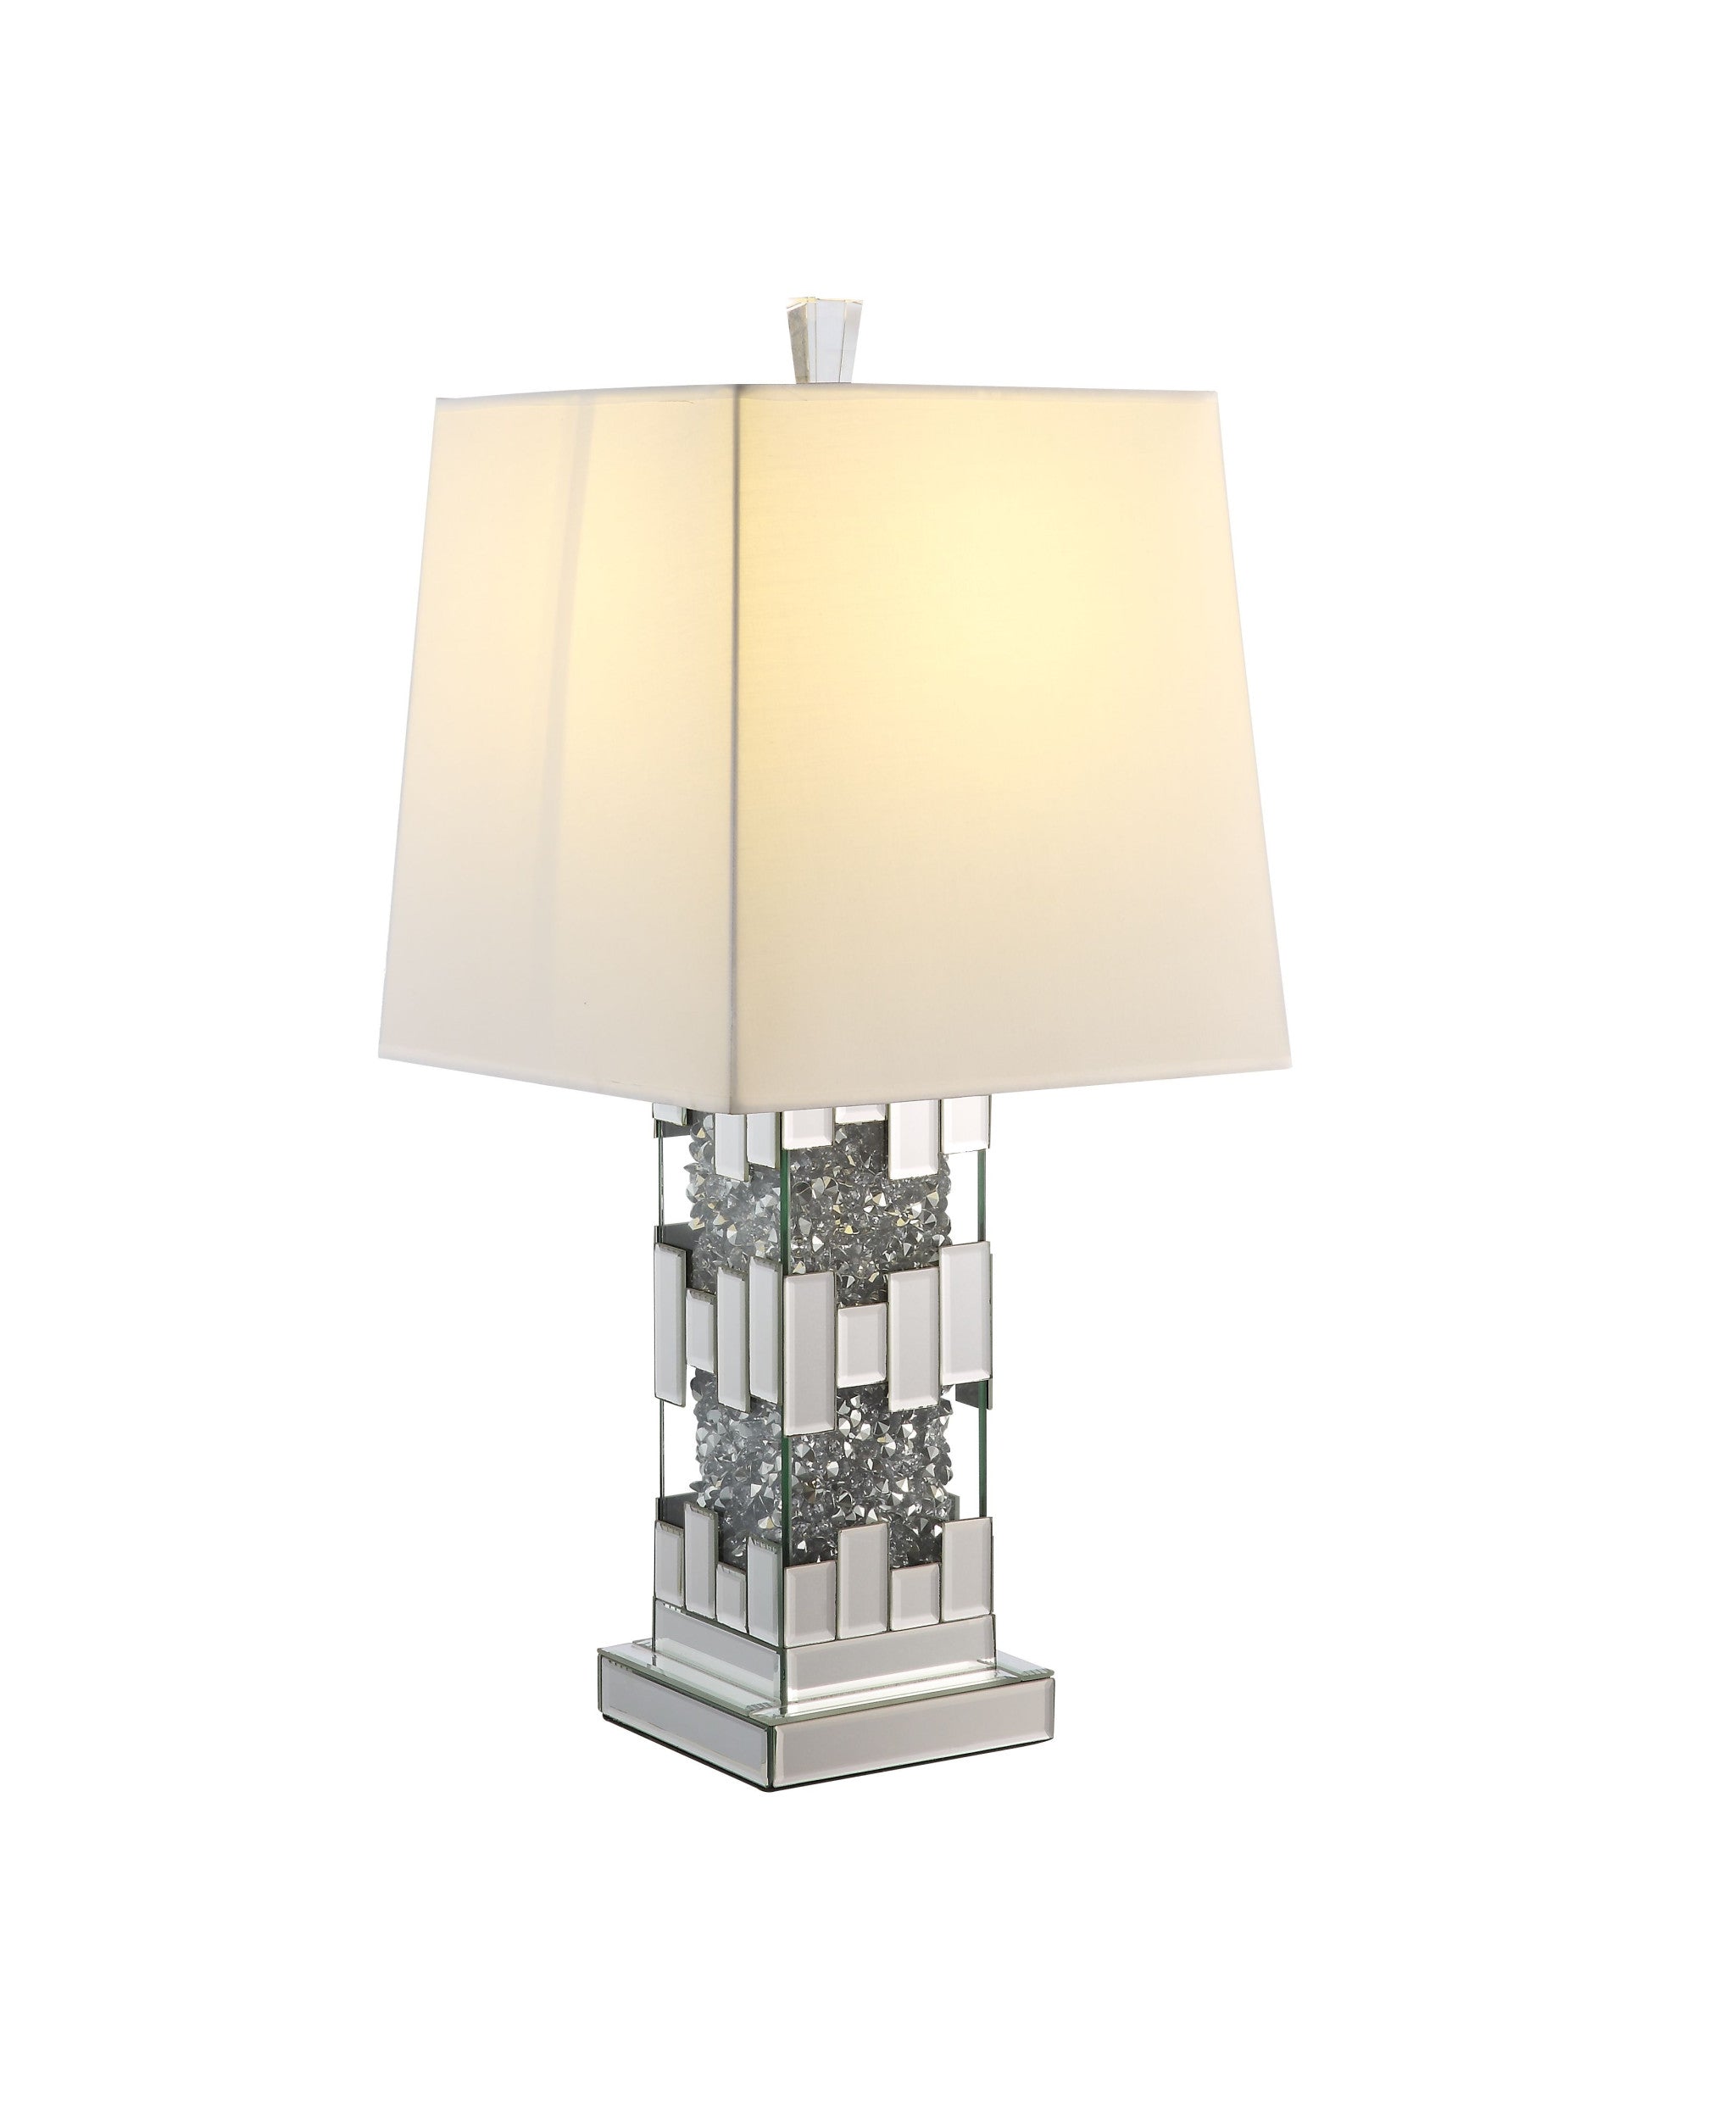 30" Mirrored Glass and Faux Crystal Geo Table Lamp With White Square Shade